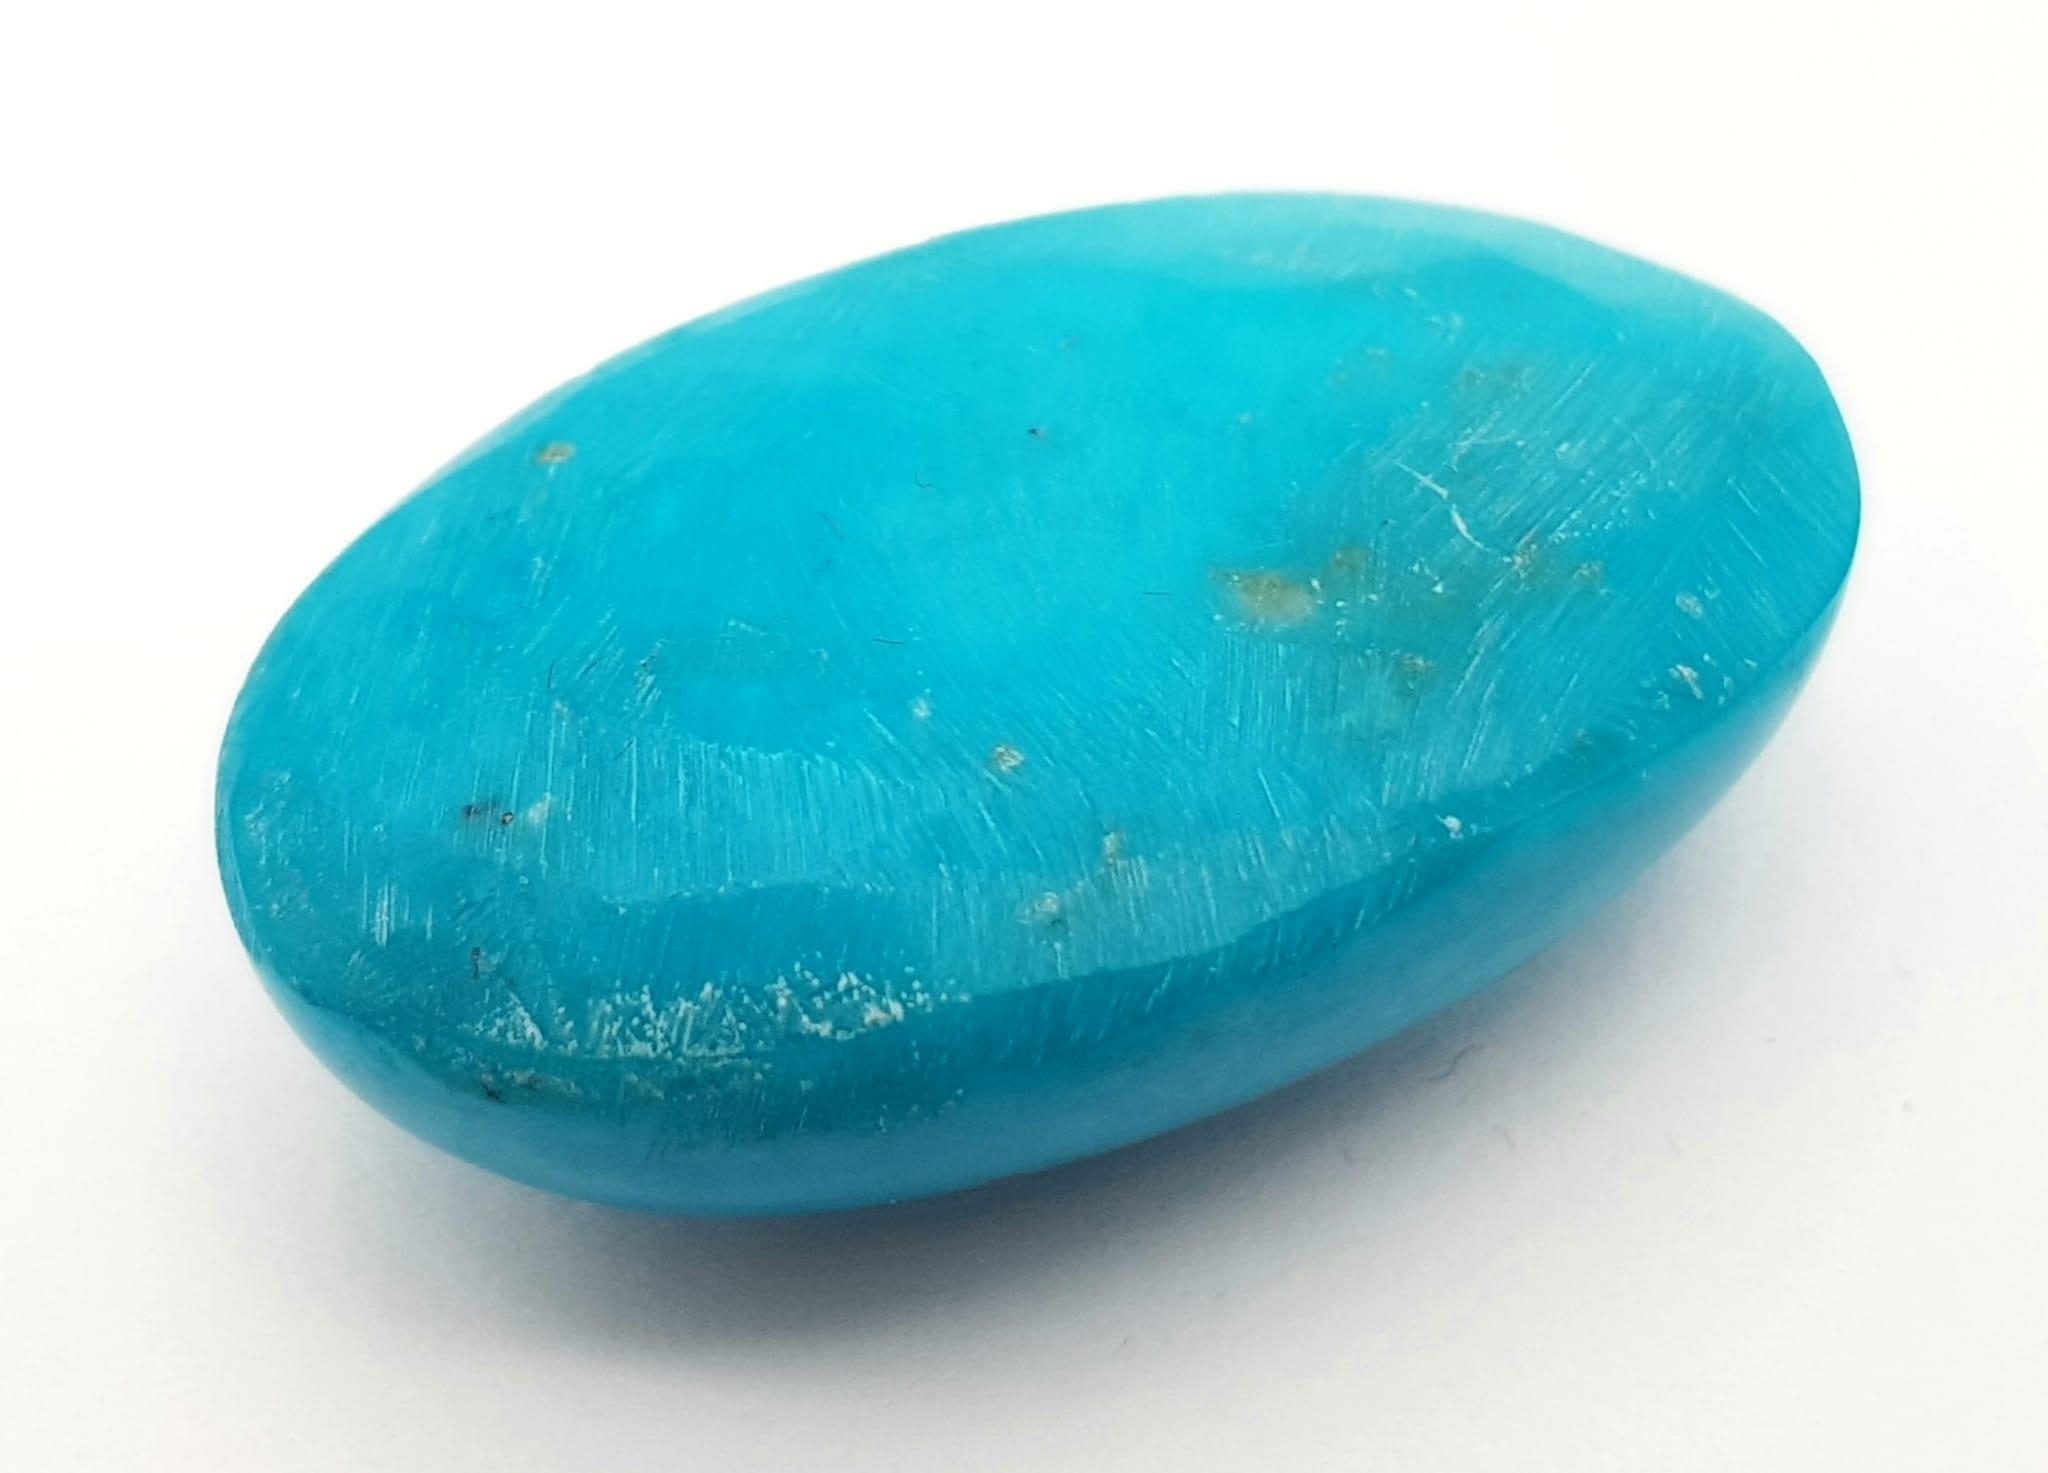 44.26 Ct Natural Turquoise. Aqua Blue. Shape Cabochon. Comes with IGL&I Certificate. - Image 2 of 4